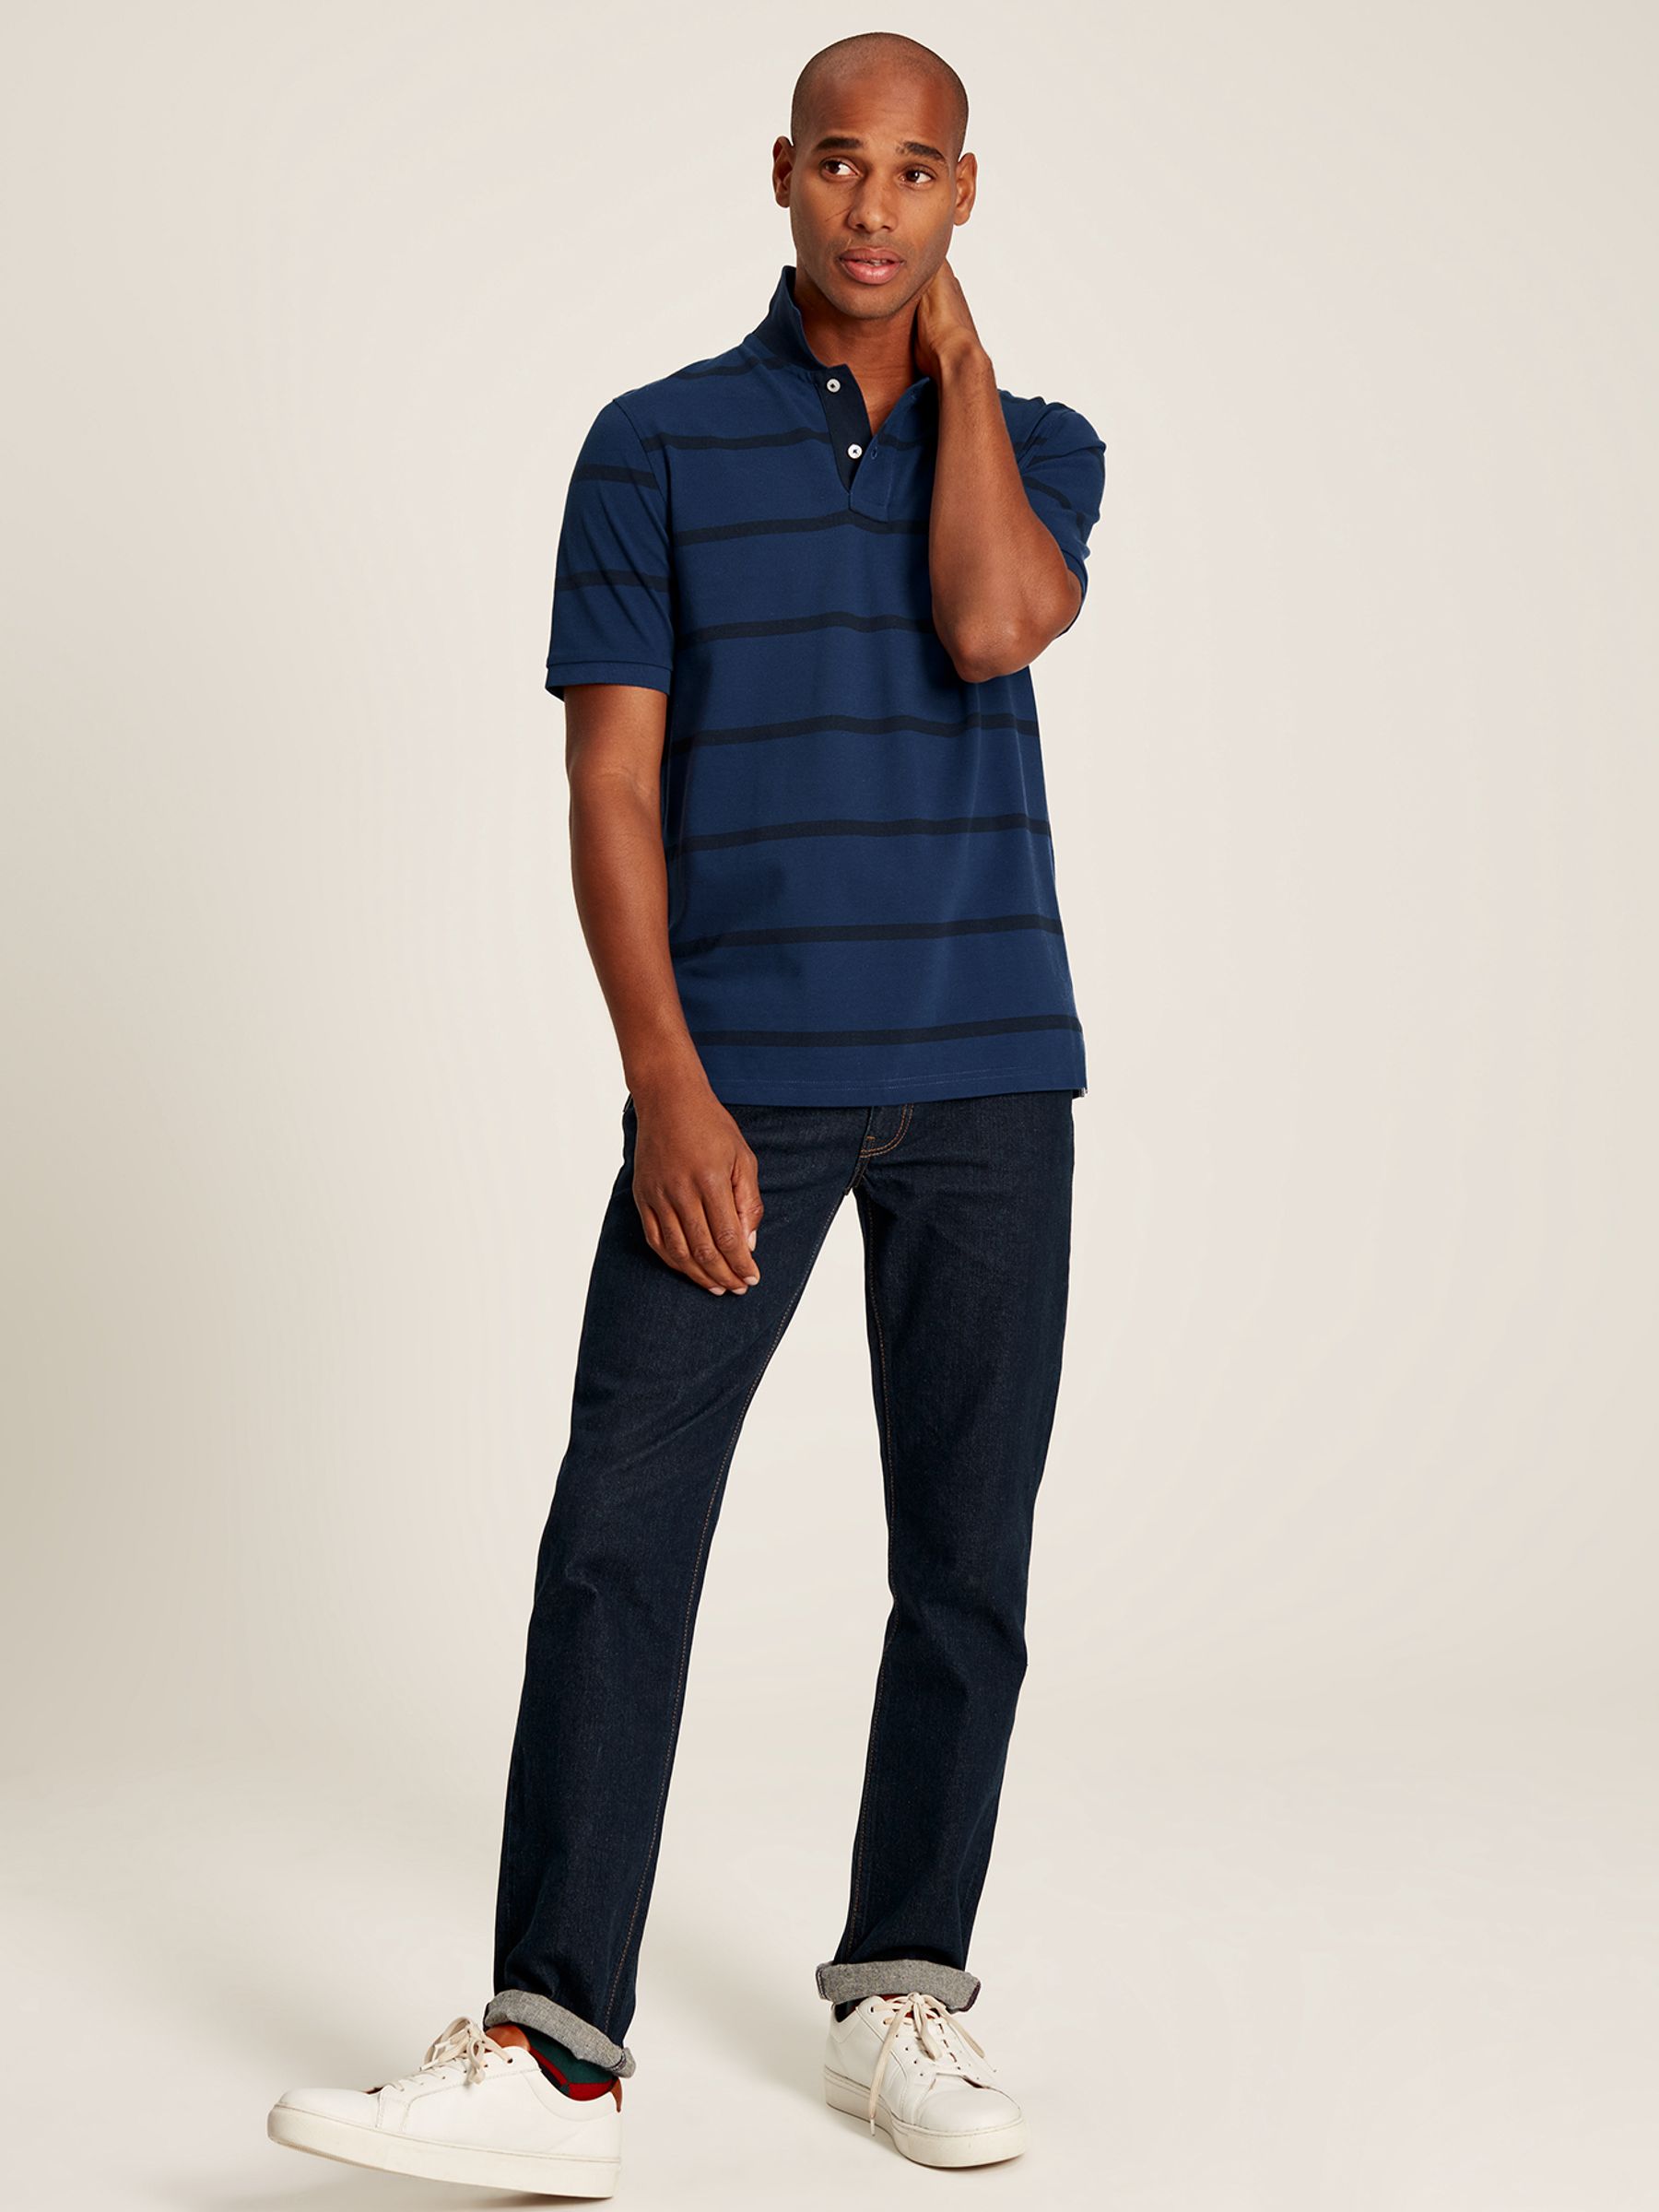 Buy Filbert Blue Classic Fit Striped Polo Shirt from the Joules online shop